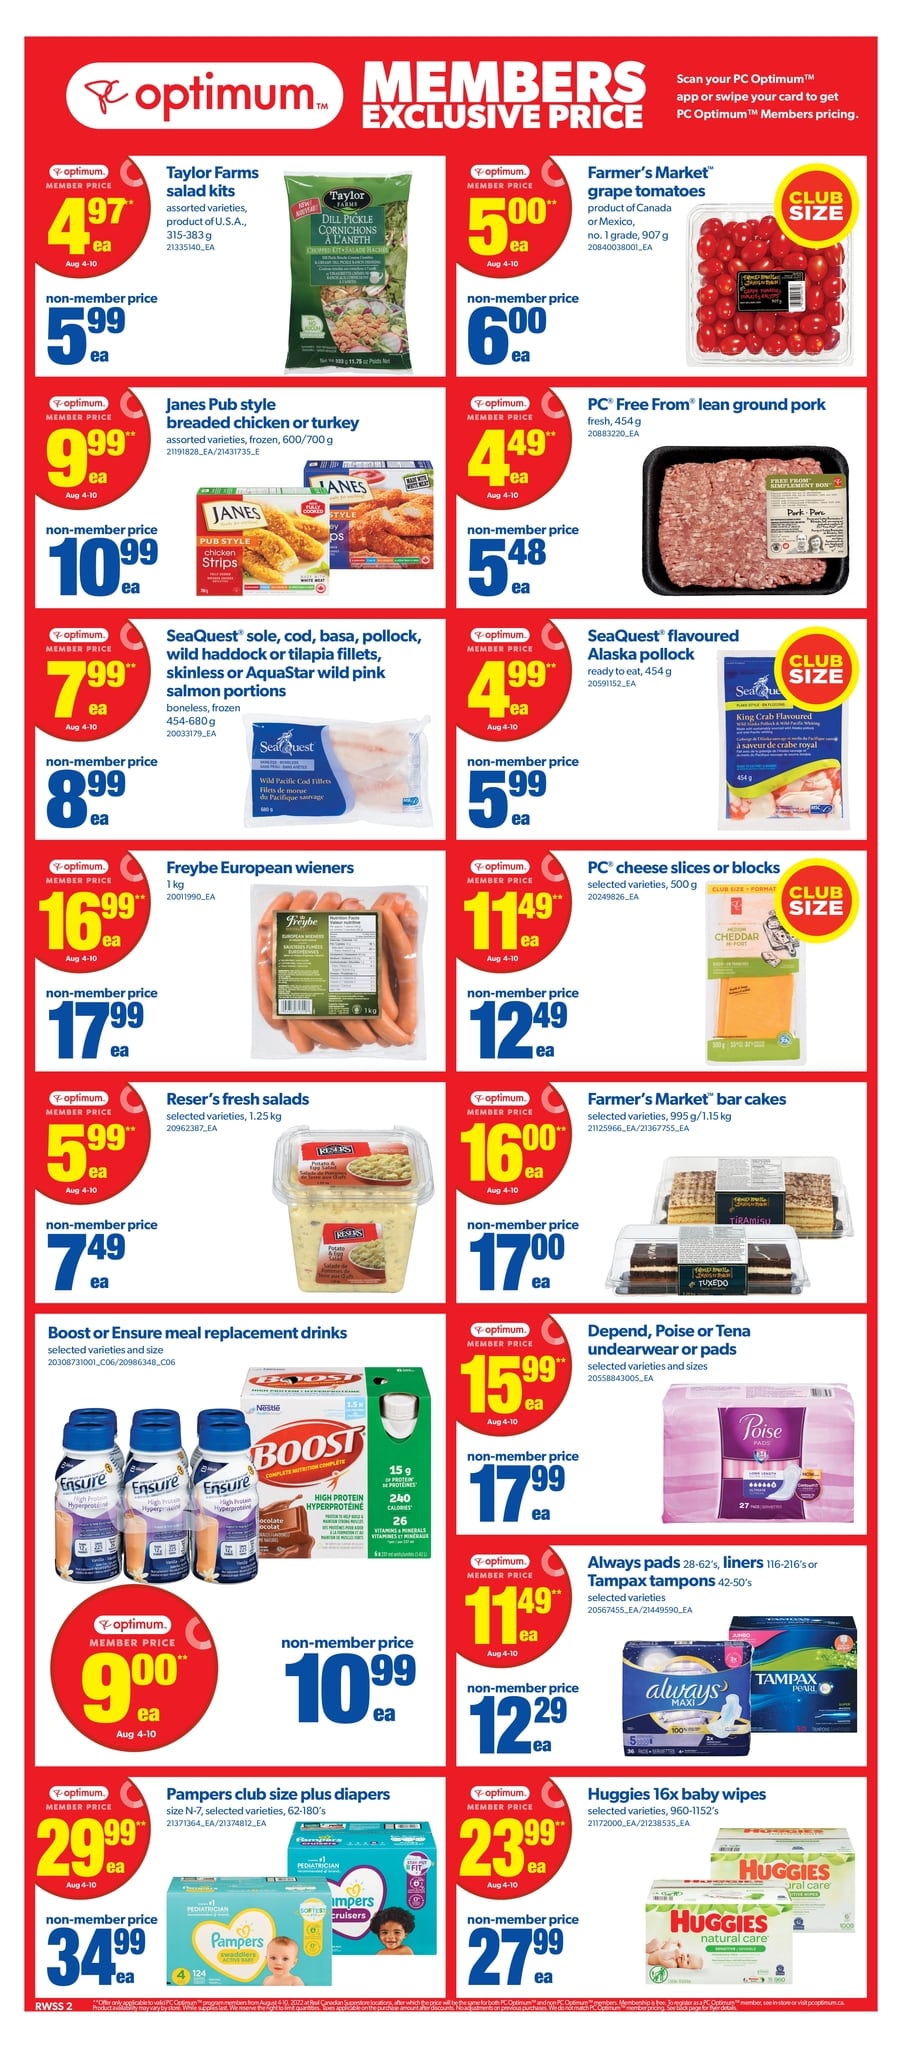 Real Canadian Superstore Western Canada - Weekly Flyer Specials - Page 2